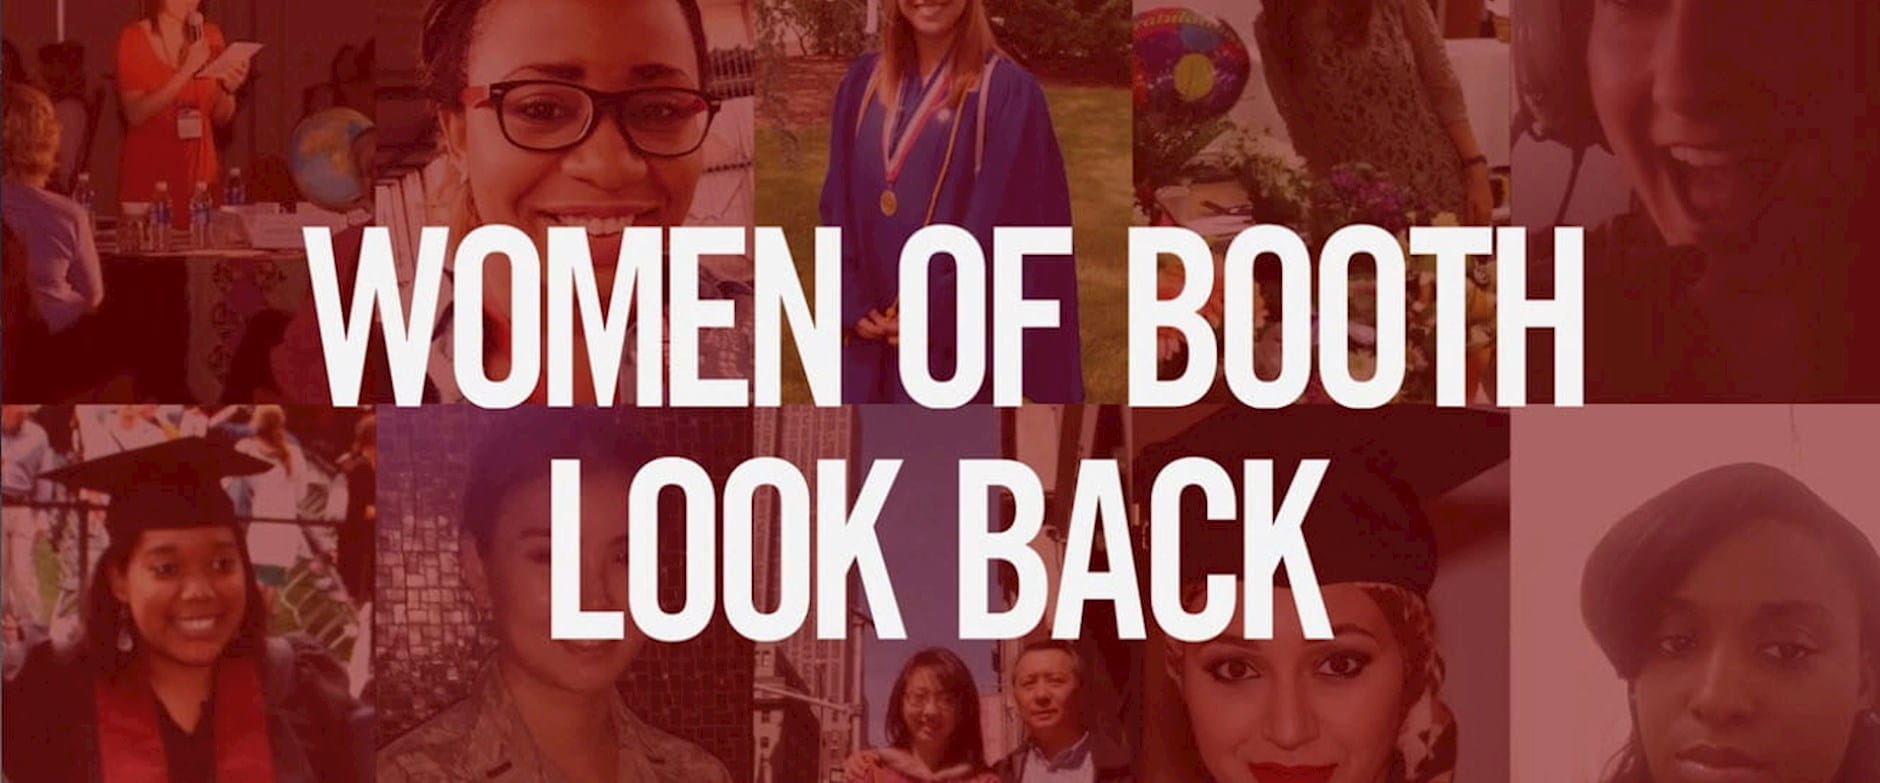 Women of Booth Look Back video